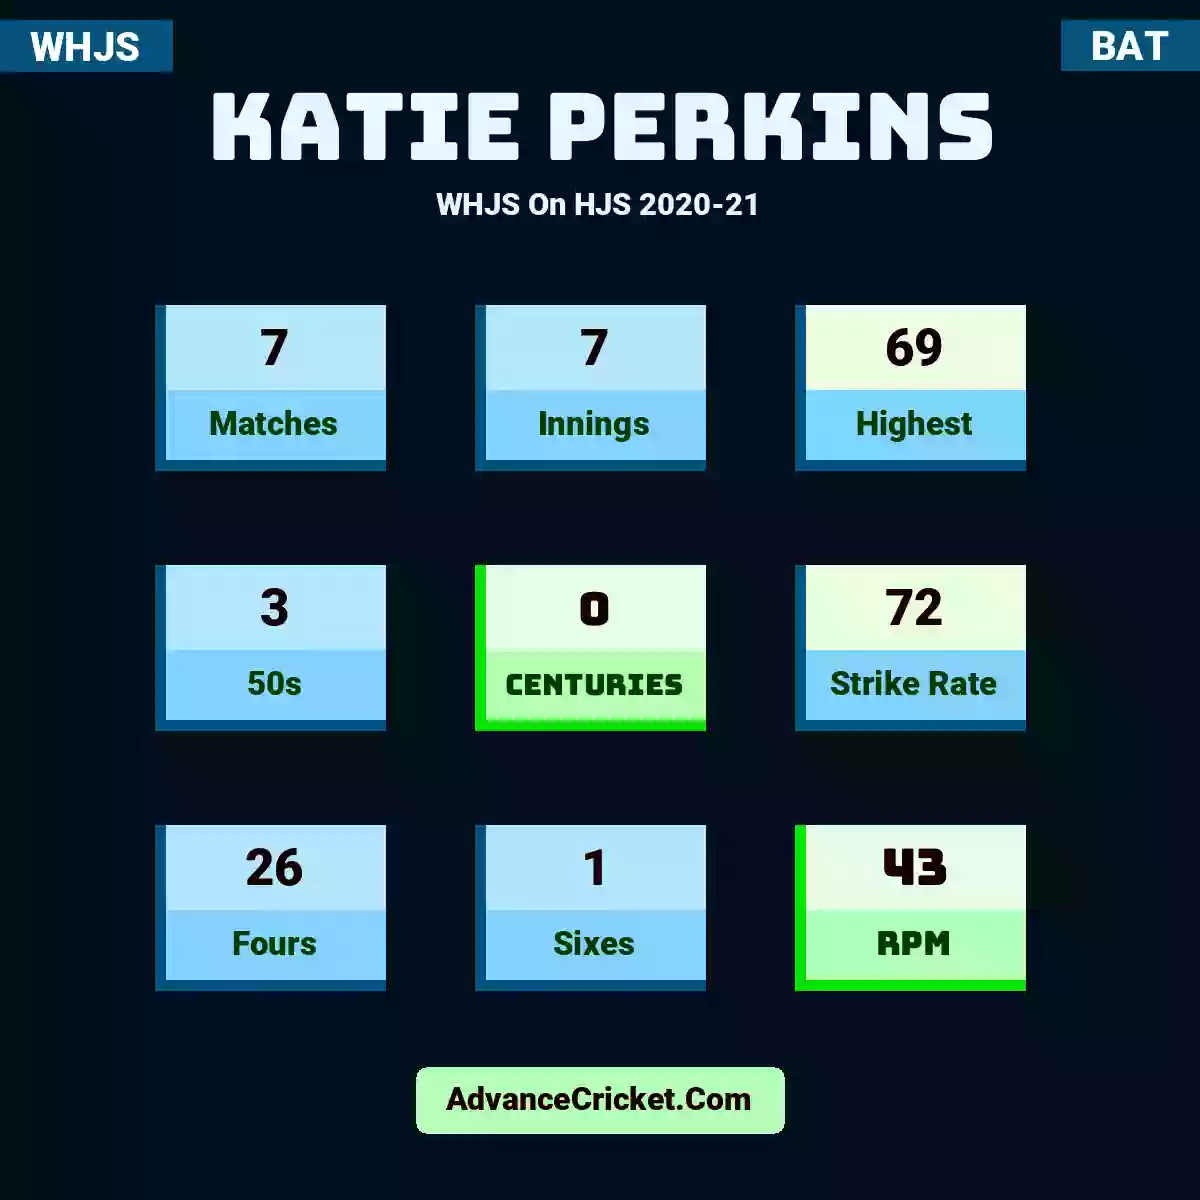 Katie Perkins WHJS  On HJS 2020-21, Katie Perkins played 7 matches, scored 69 runs as highest, 3 half-centuries, and 0 centuries, with a strike rate of 72. K.Perkins hit 26 fours and 1 sixes, with an RPM of 43.